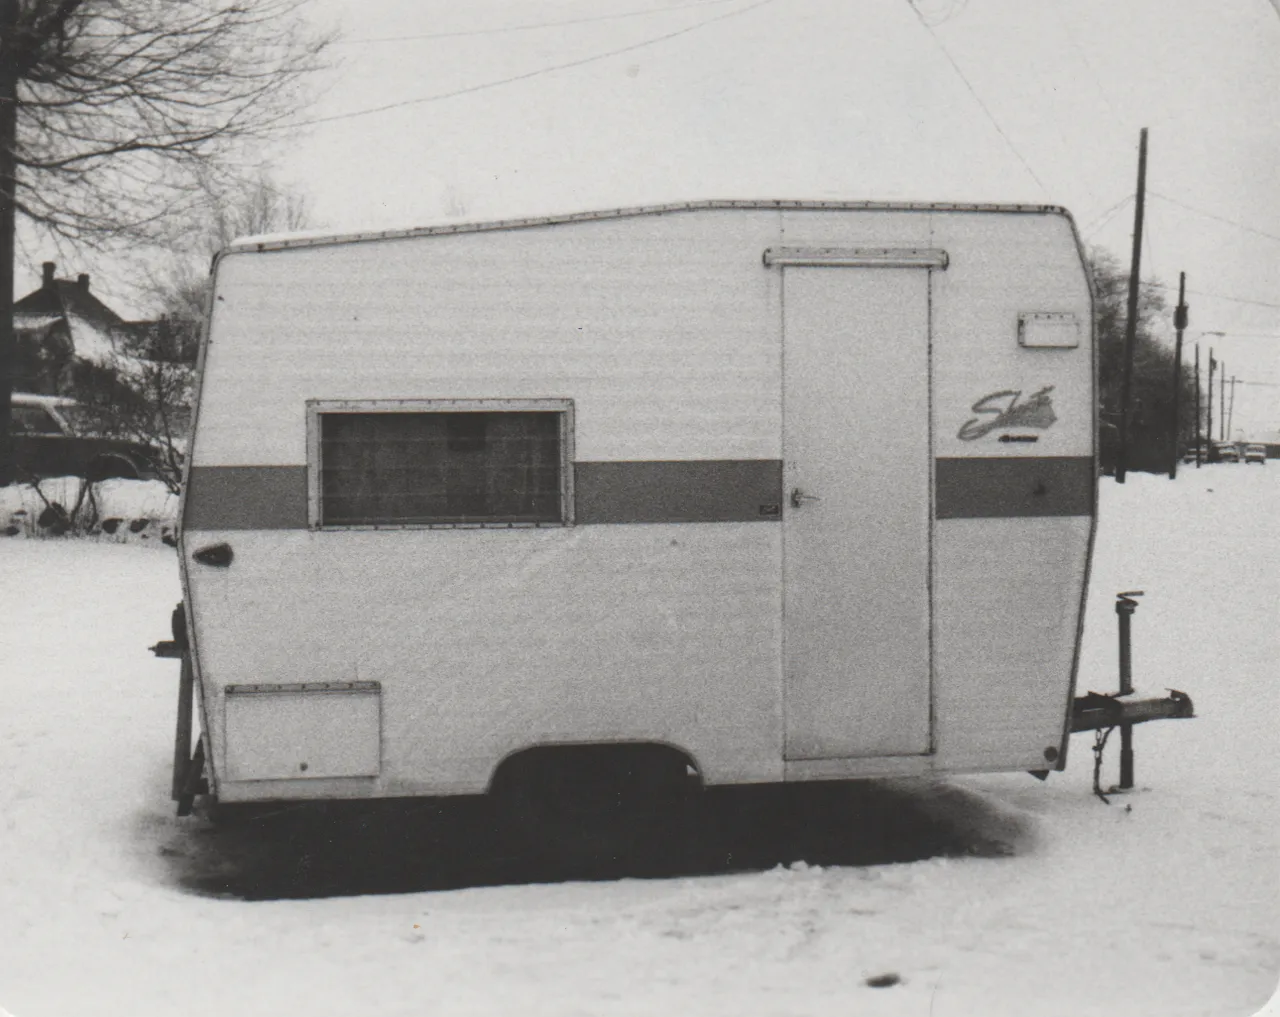 1975-02-08 - Saturday - Snow around a trailer, 1pic.png